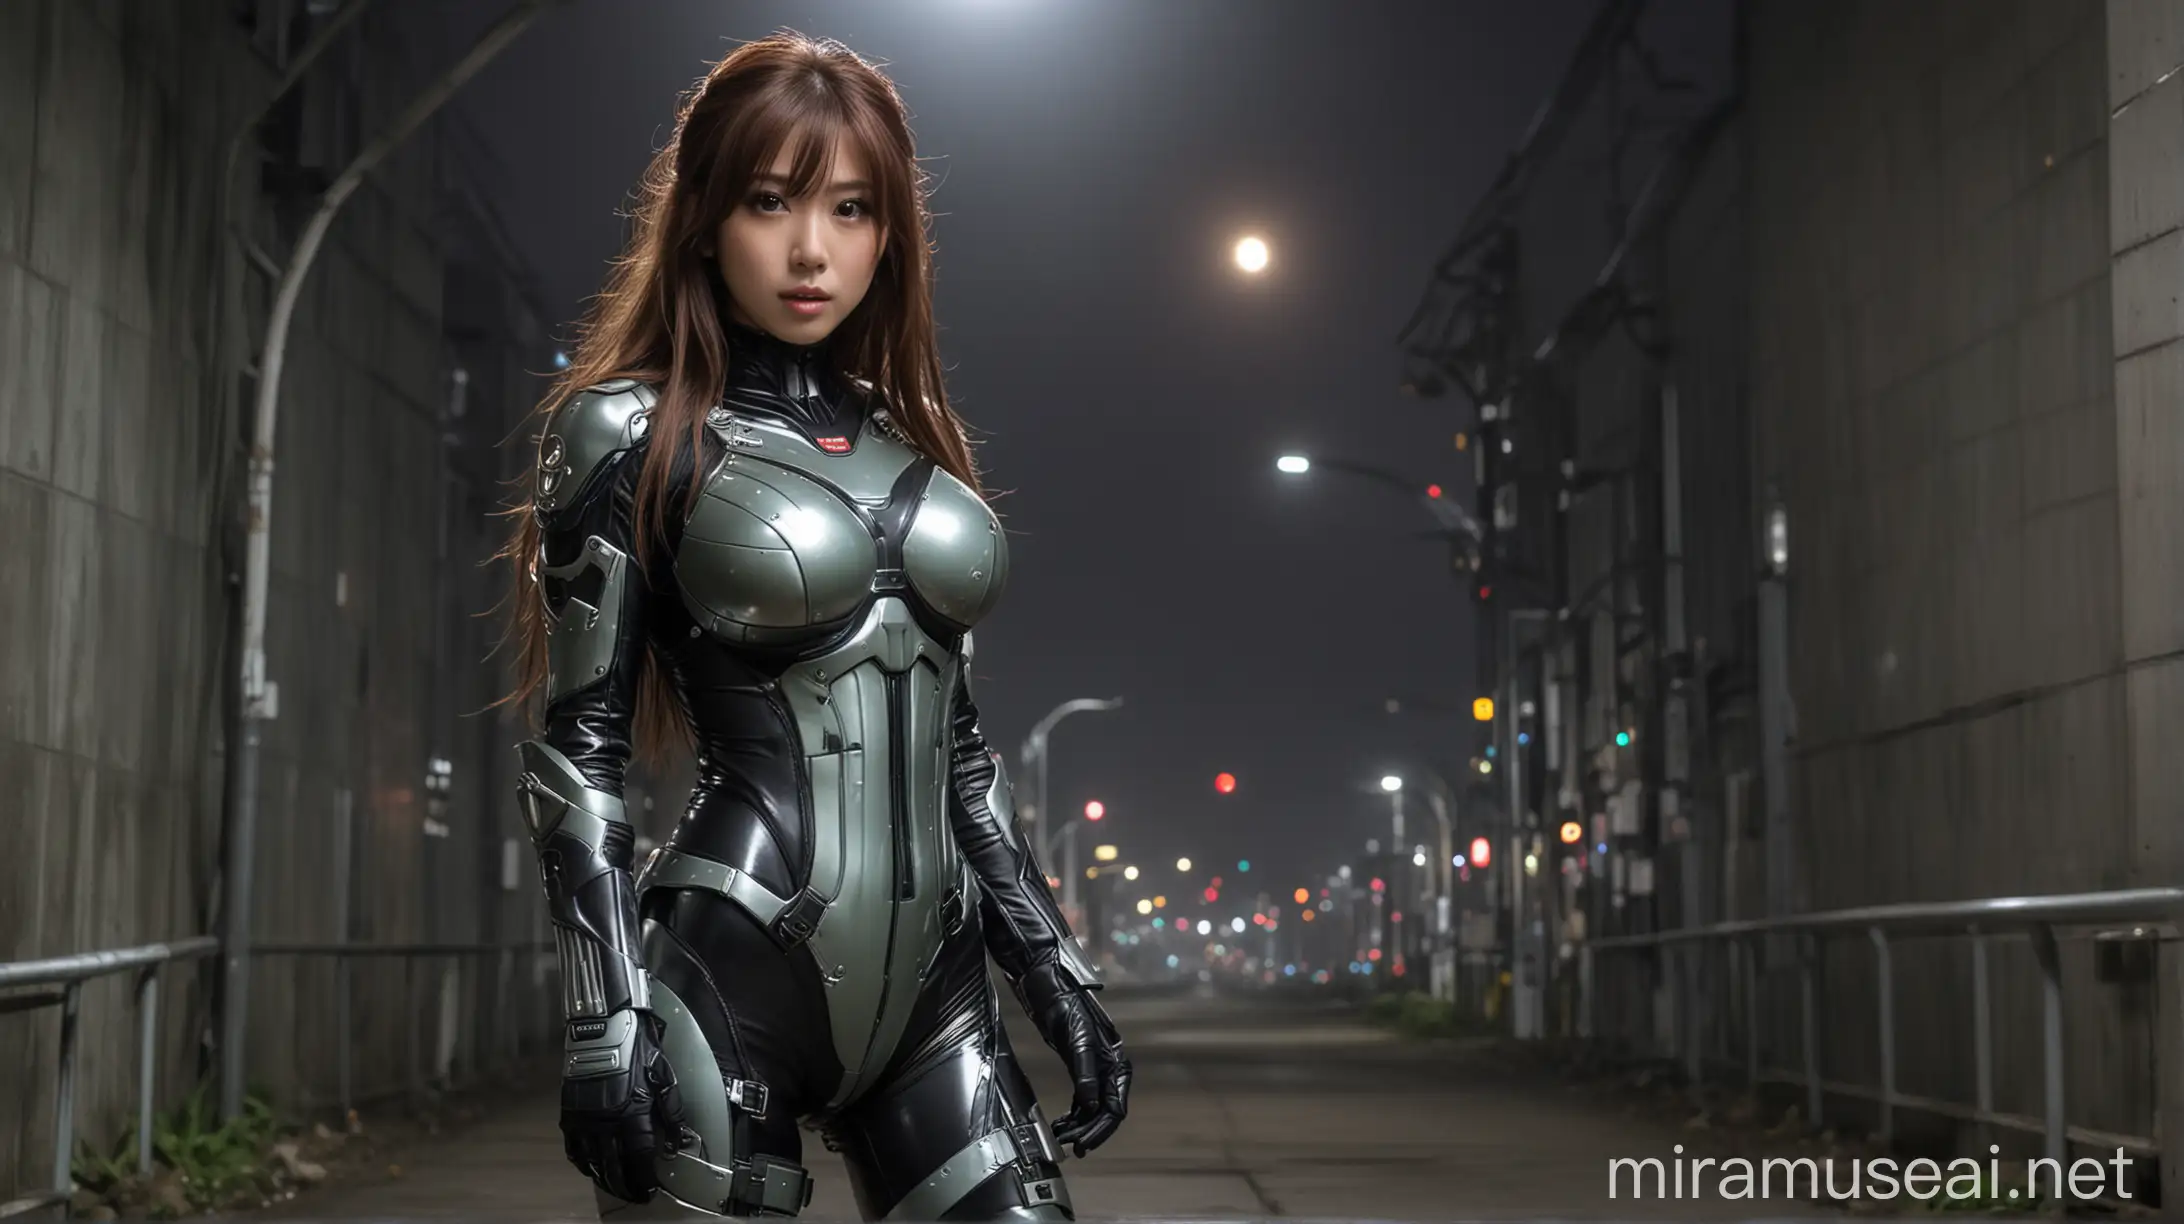 in the left side of the picture japan girl, sexy makeup, big eyes and fat lips, slim, long hair, wild hair, full body at full length, fitness model, big boobs, wide hips, huge tits, tight spacesuit, high armored spacesuit, detailed armor, viridian and black spacesuit, glowing stripes on spacesuit, night sky, stars, planets, exploding planet in the sky